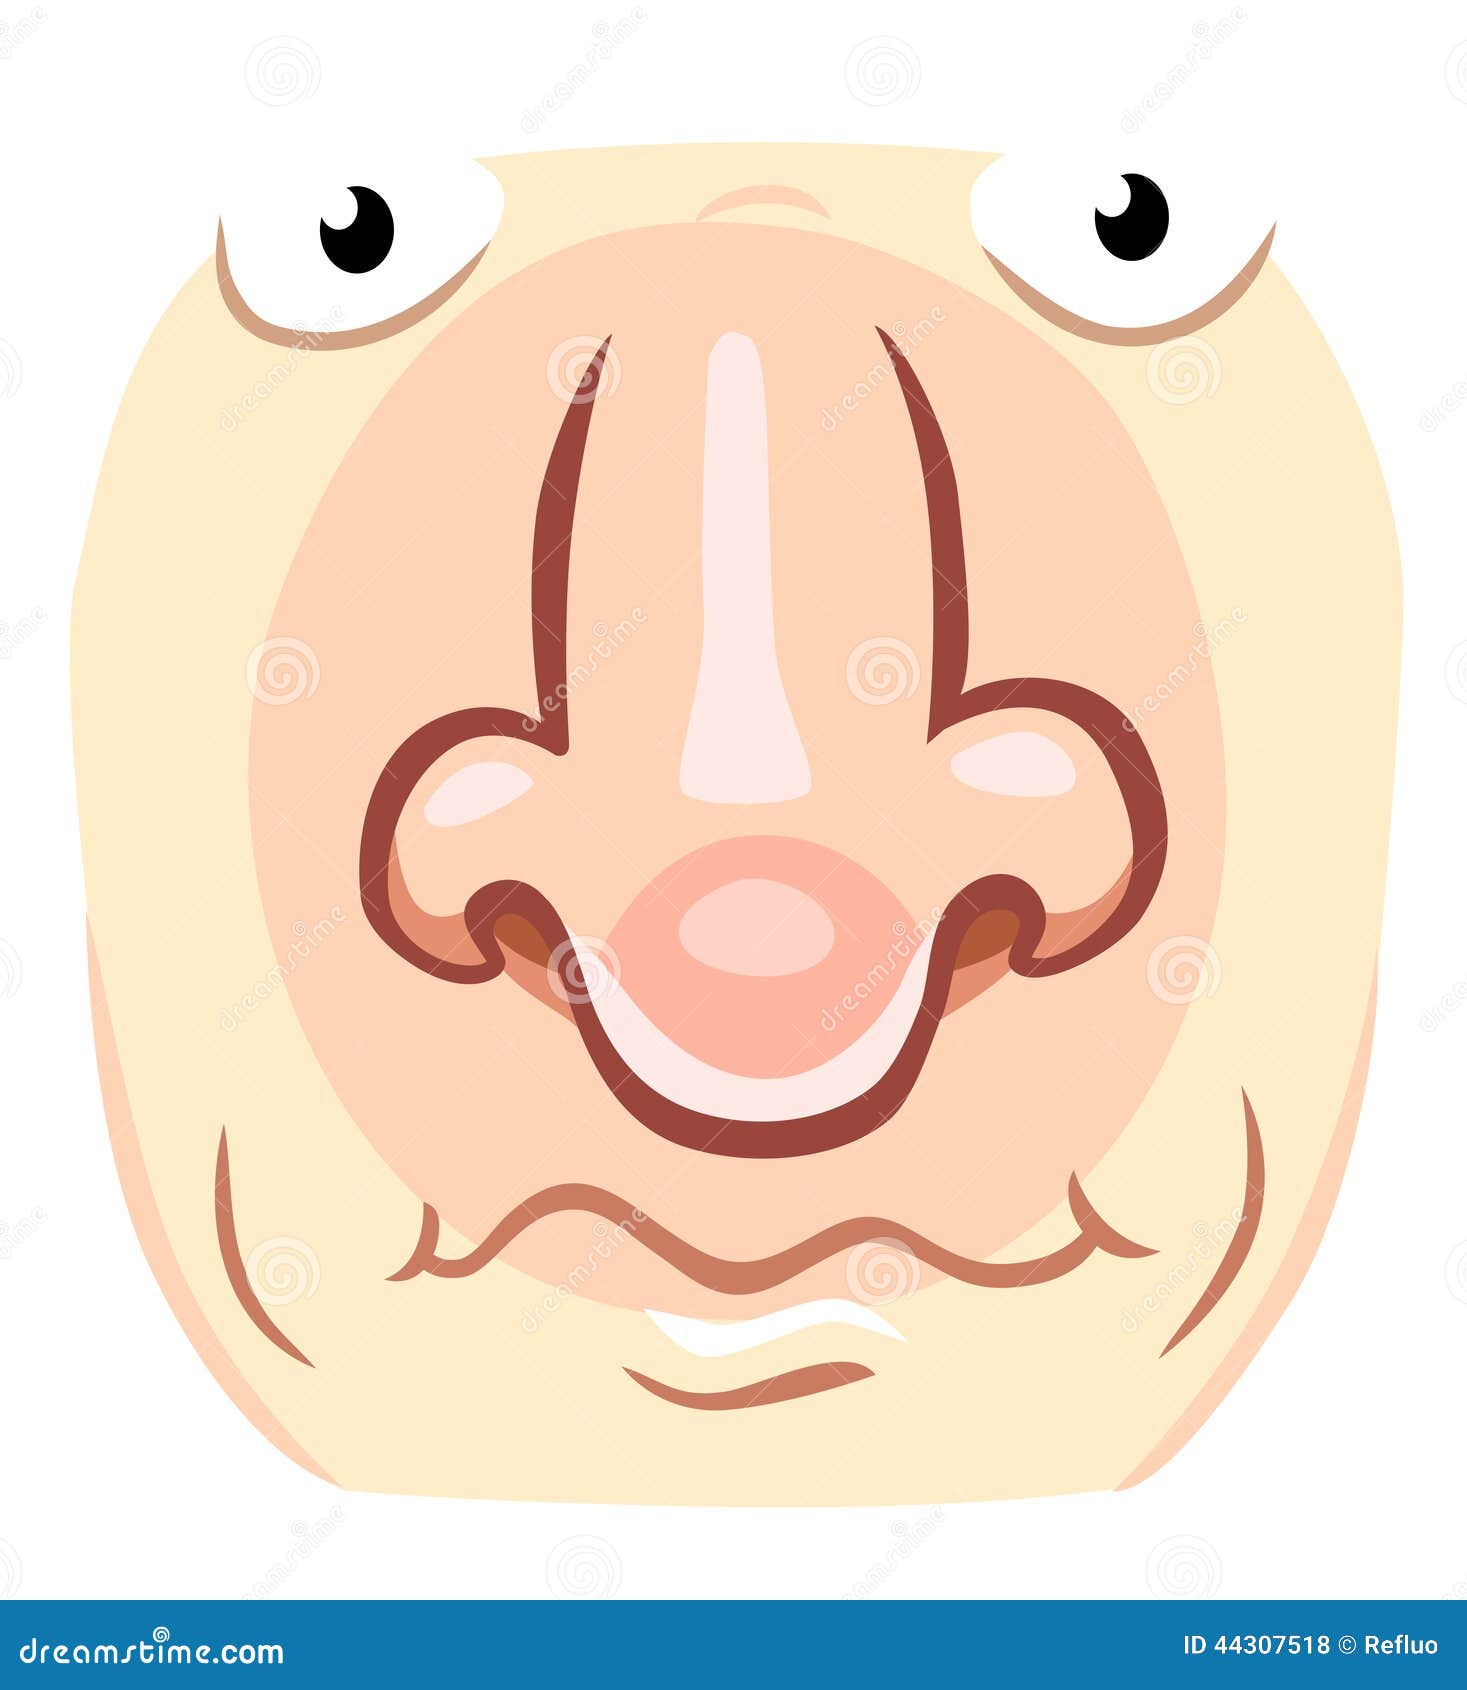 funny noses clipart - photo #47